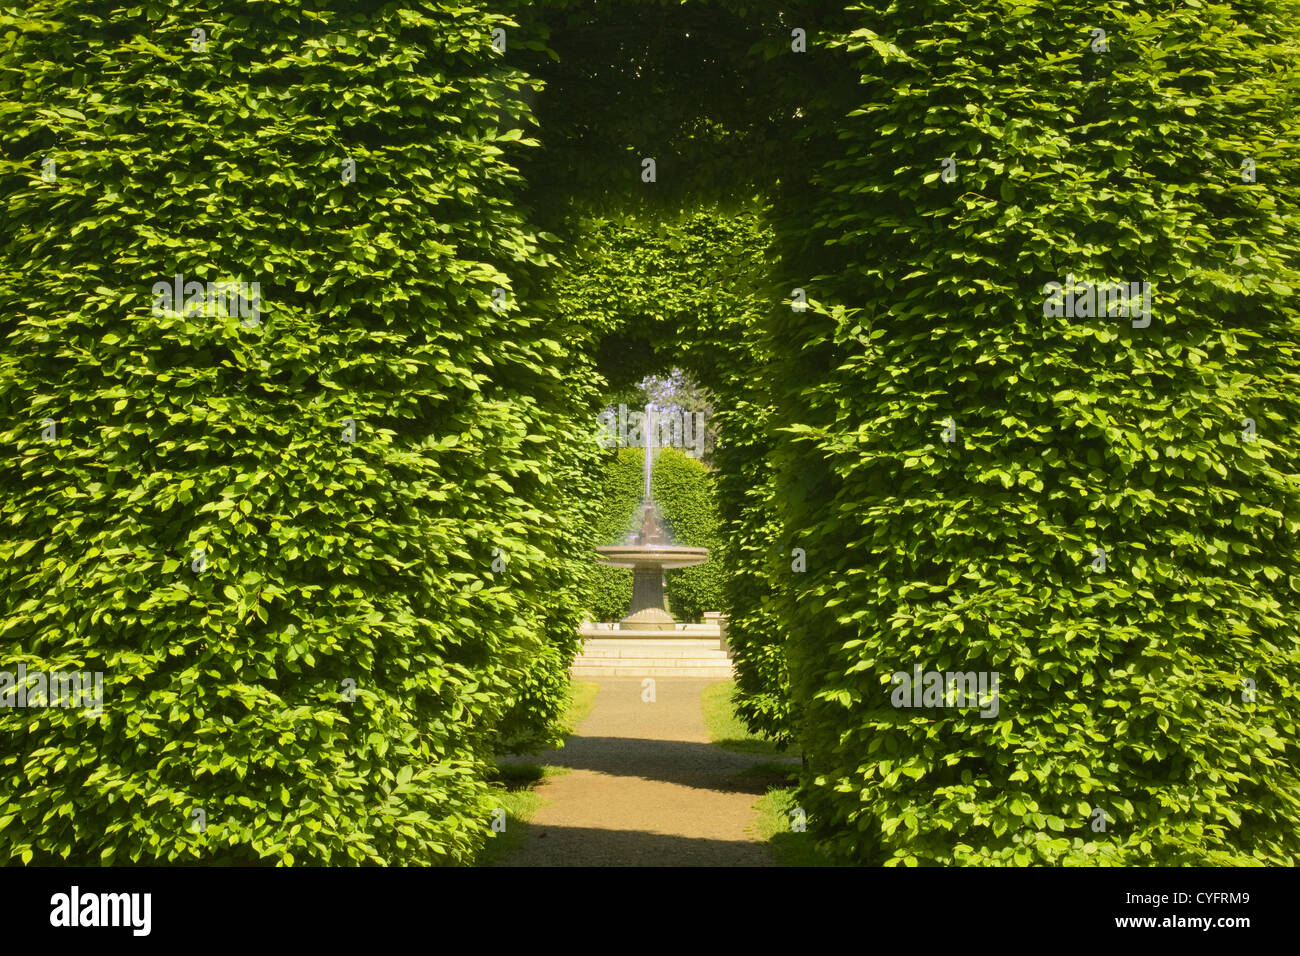 WA05519-00...WASHINGTON - Arches at the side entrance to the Duncan Garden at Manito City Park in Spokane. Stock Photo